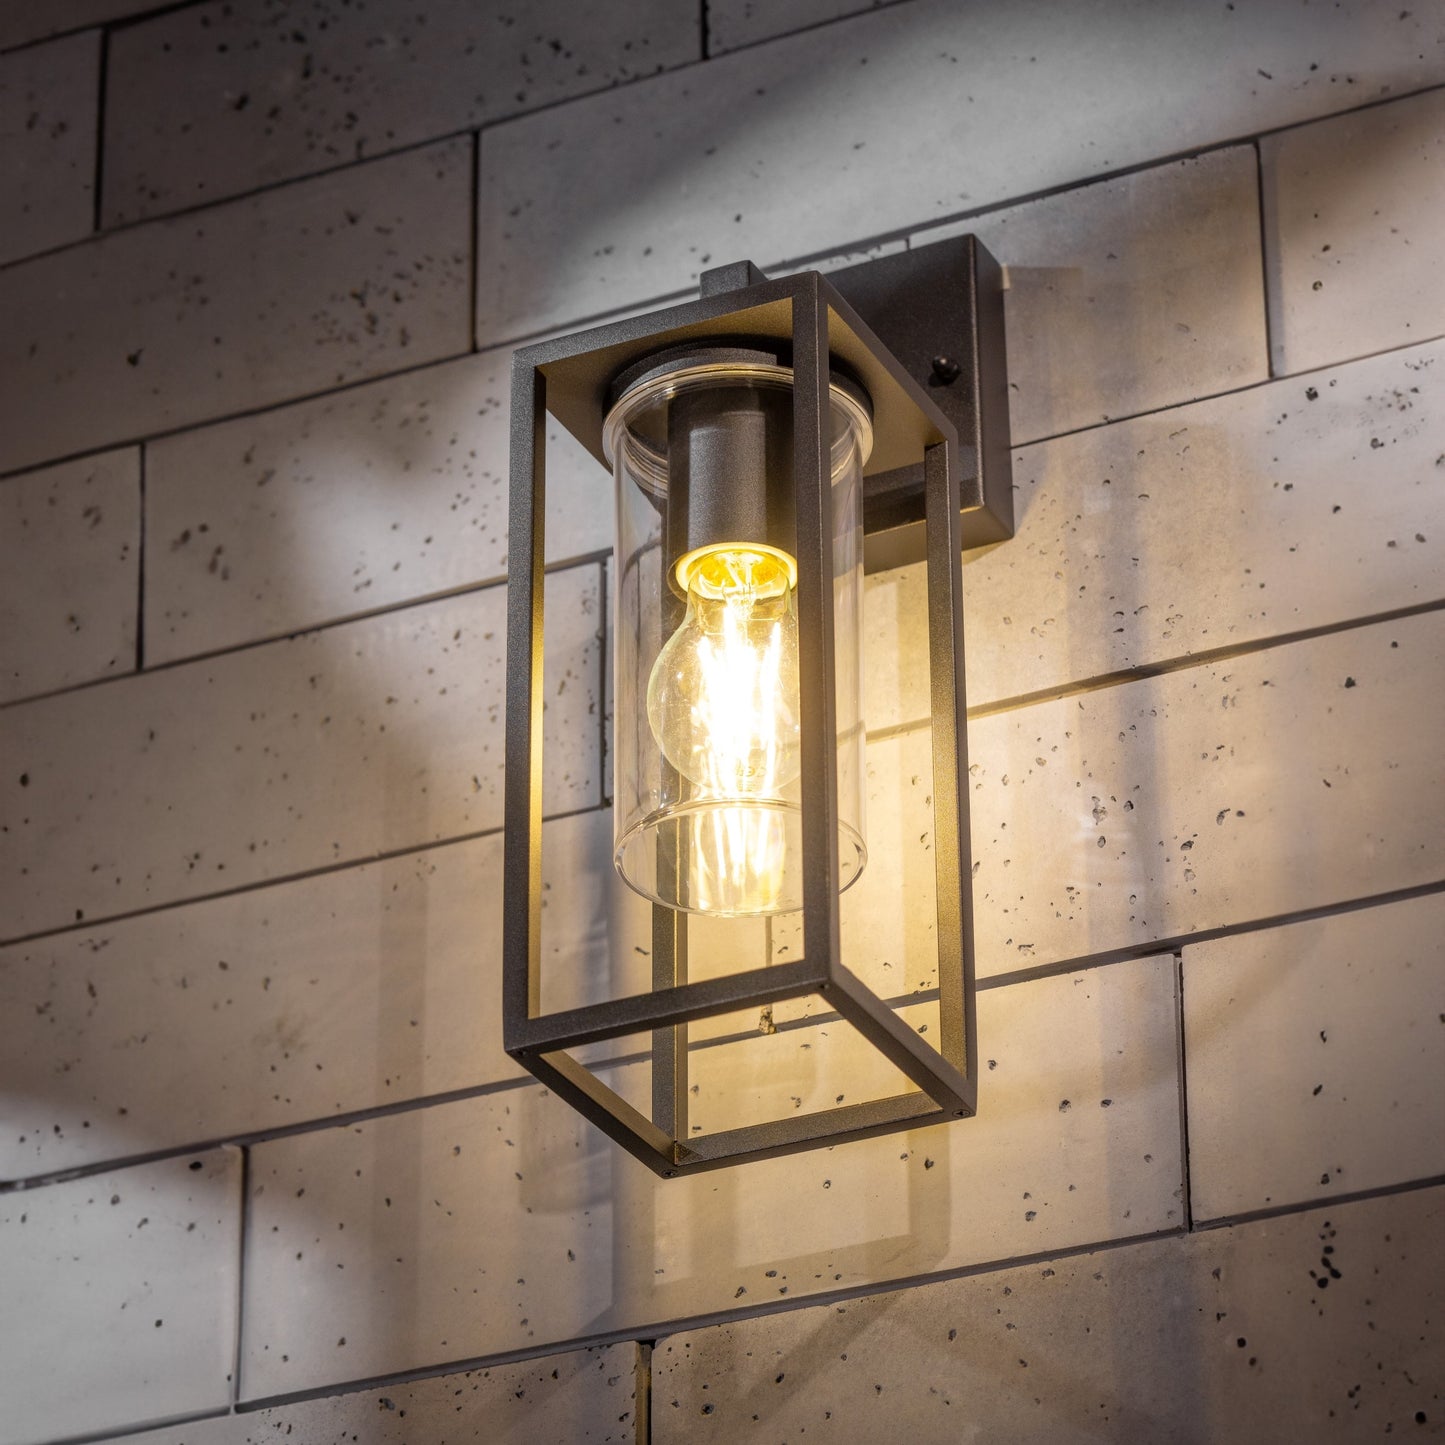 If you’re looking for a modern take on a traditional outdoor wall light, this black lantern  wall light with clear diffuser is perfect for adding style and protection for your home. This classic design with a contemporary twist, styled with a metal lantern shape and fitted with a cylinder diffuser that allows the light to shine effectively.